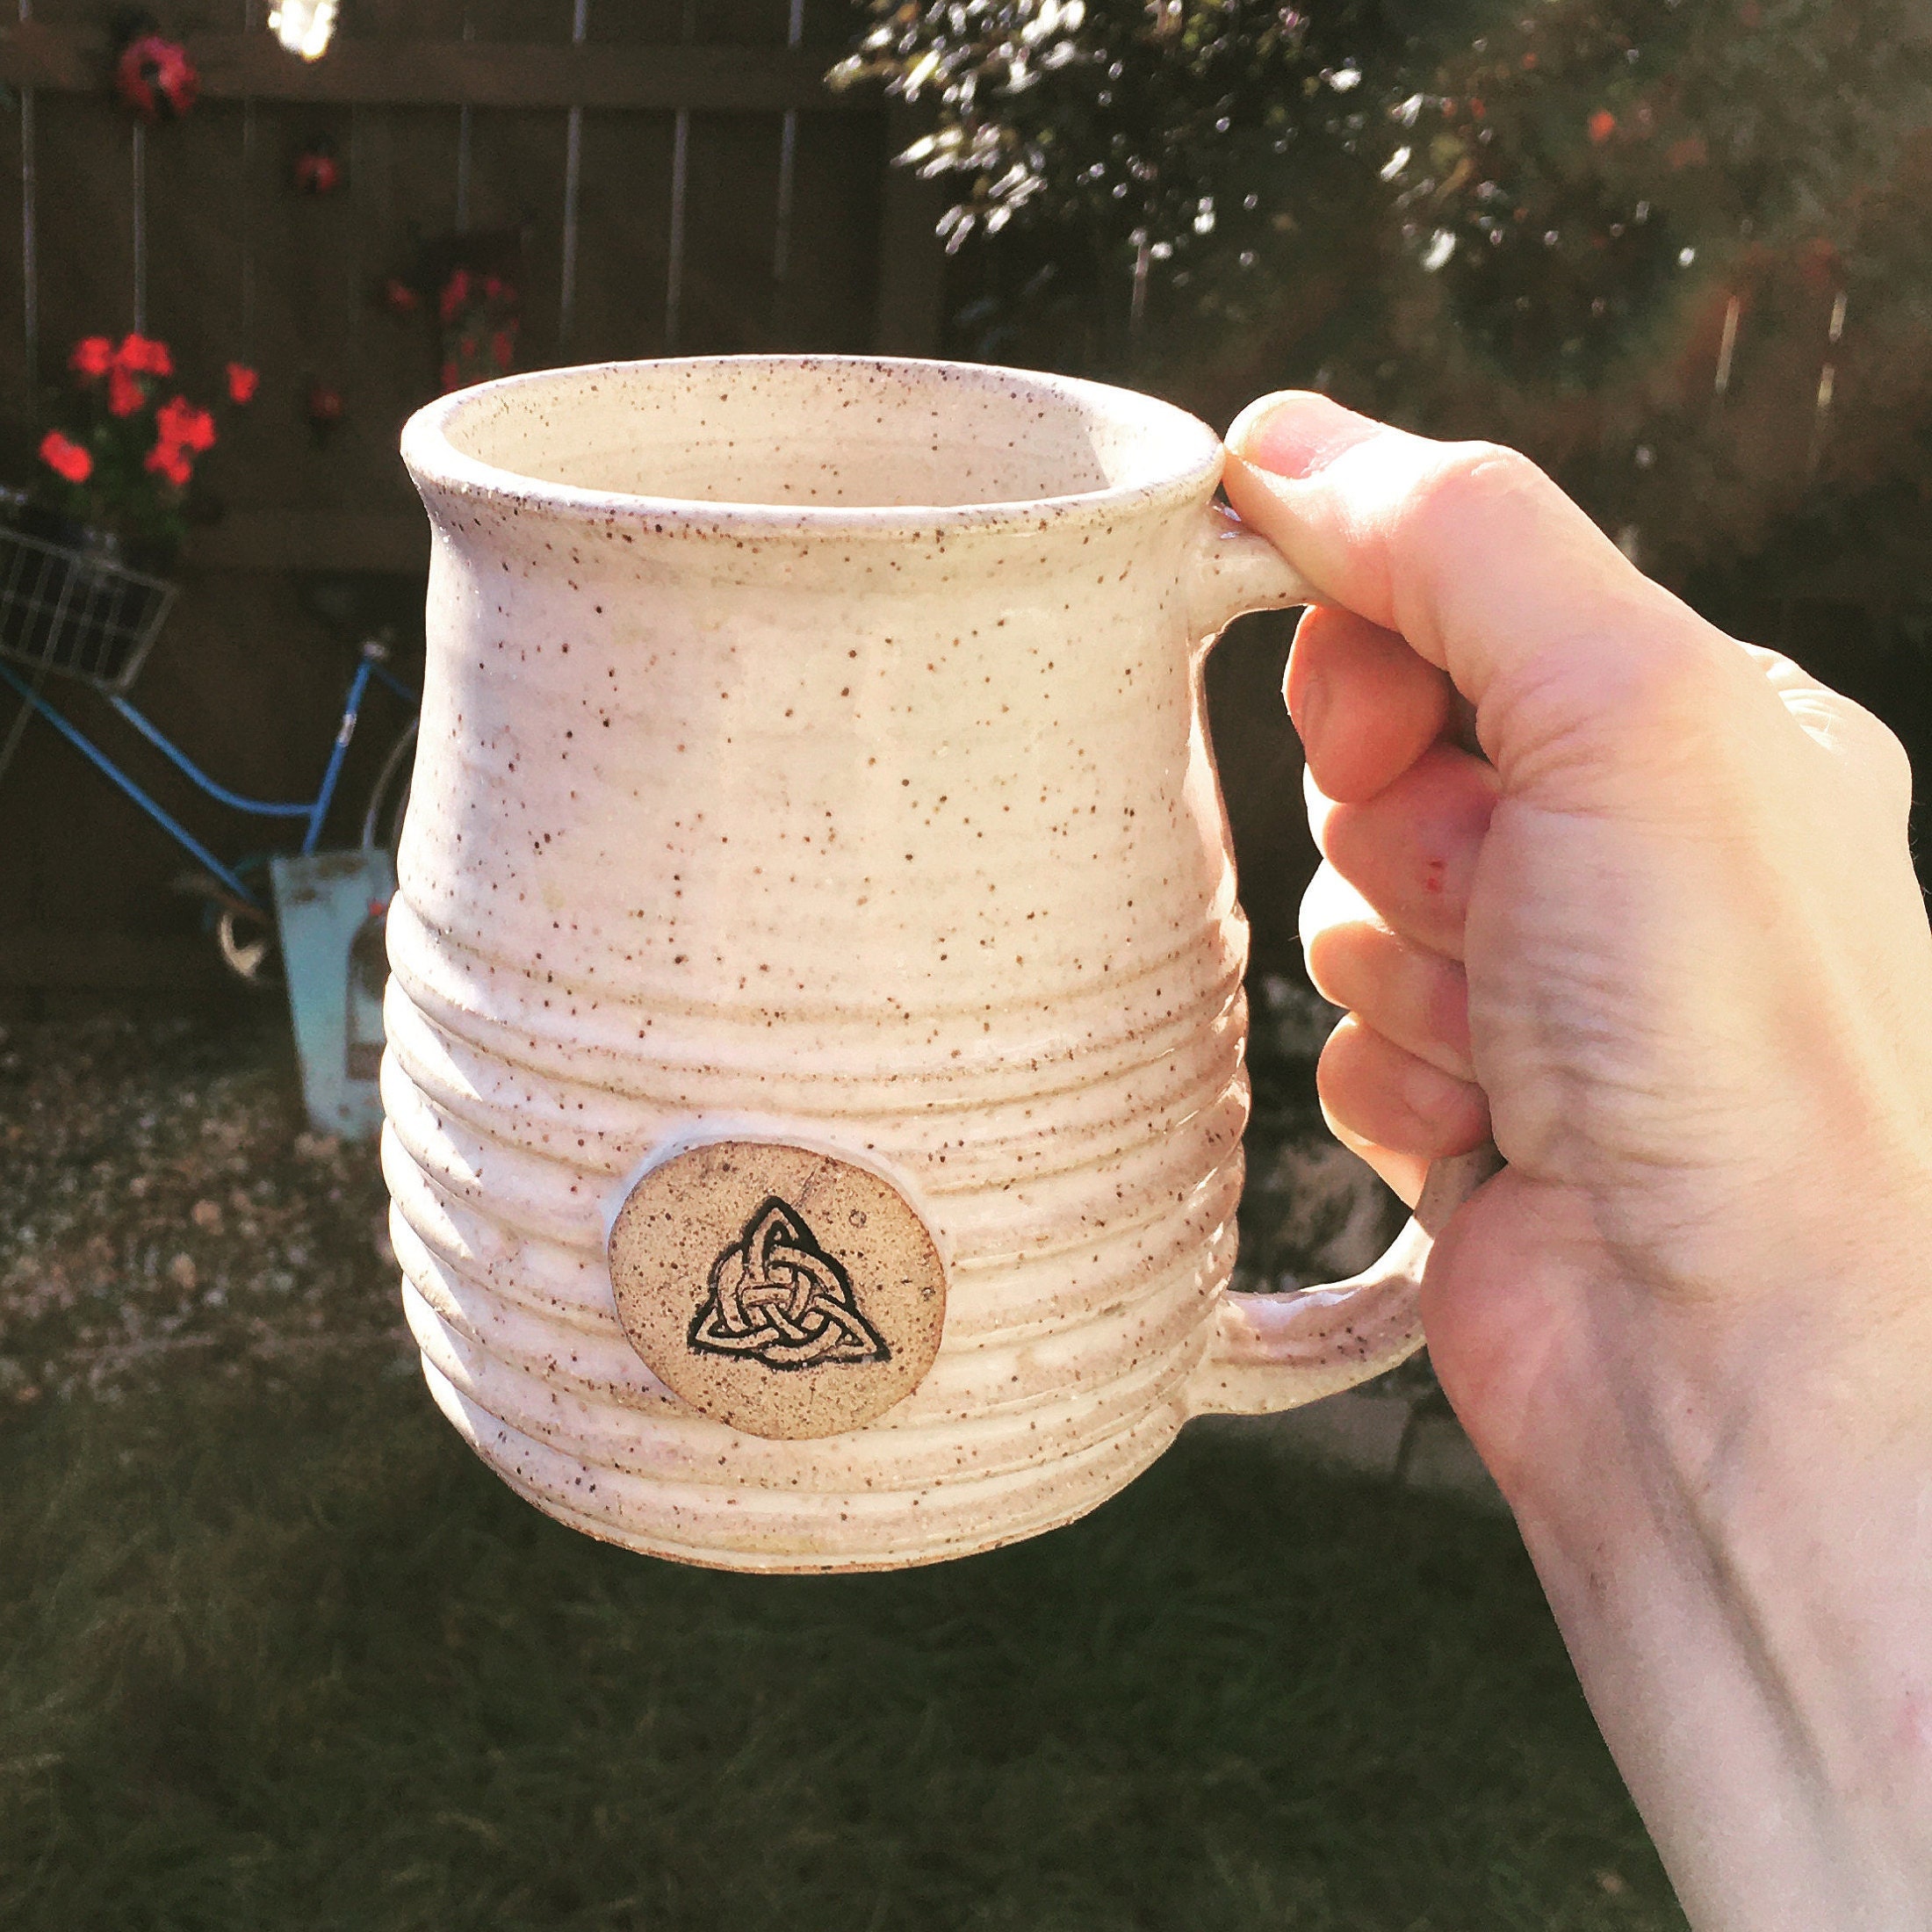 Wooden Travel Mugs Made in Indiana, offered by the Vermont Bowl